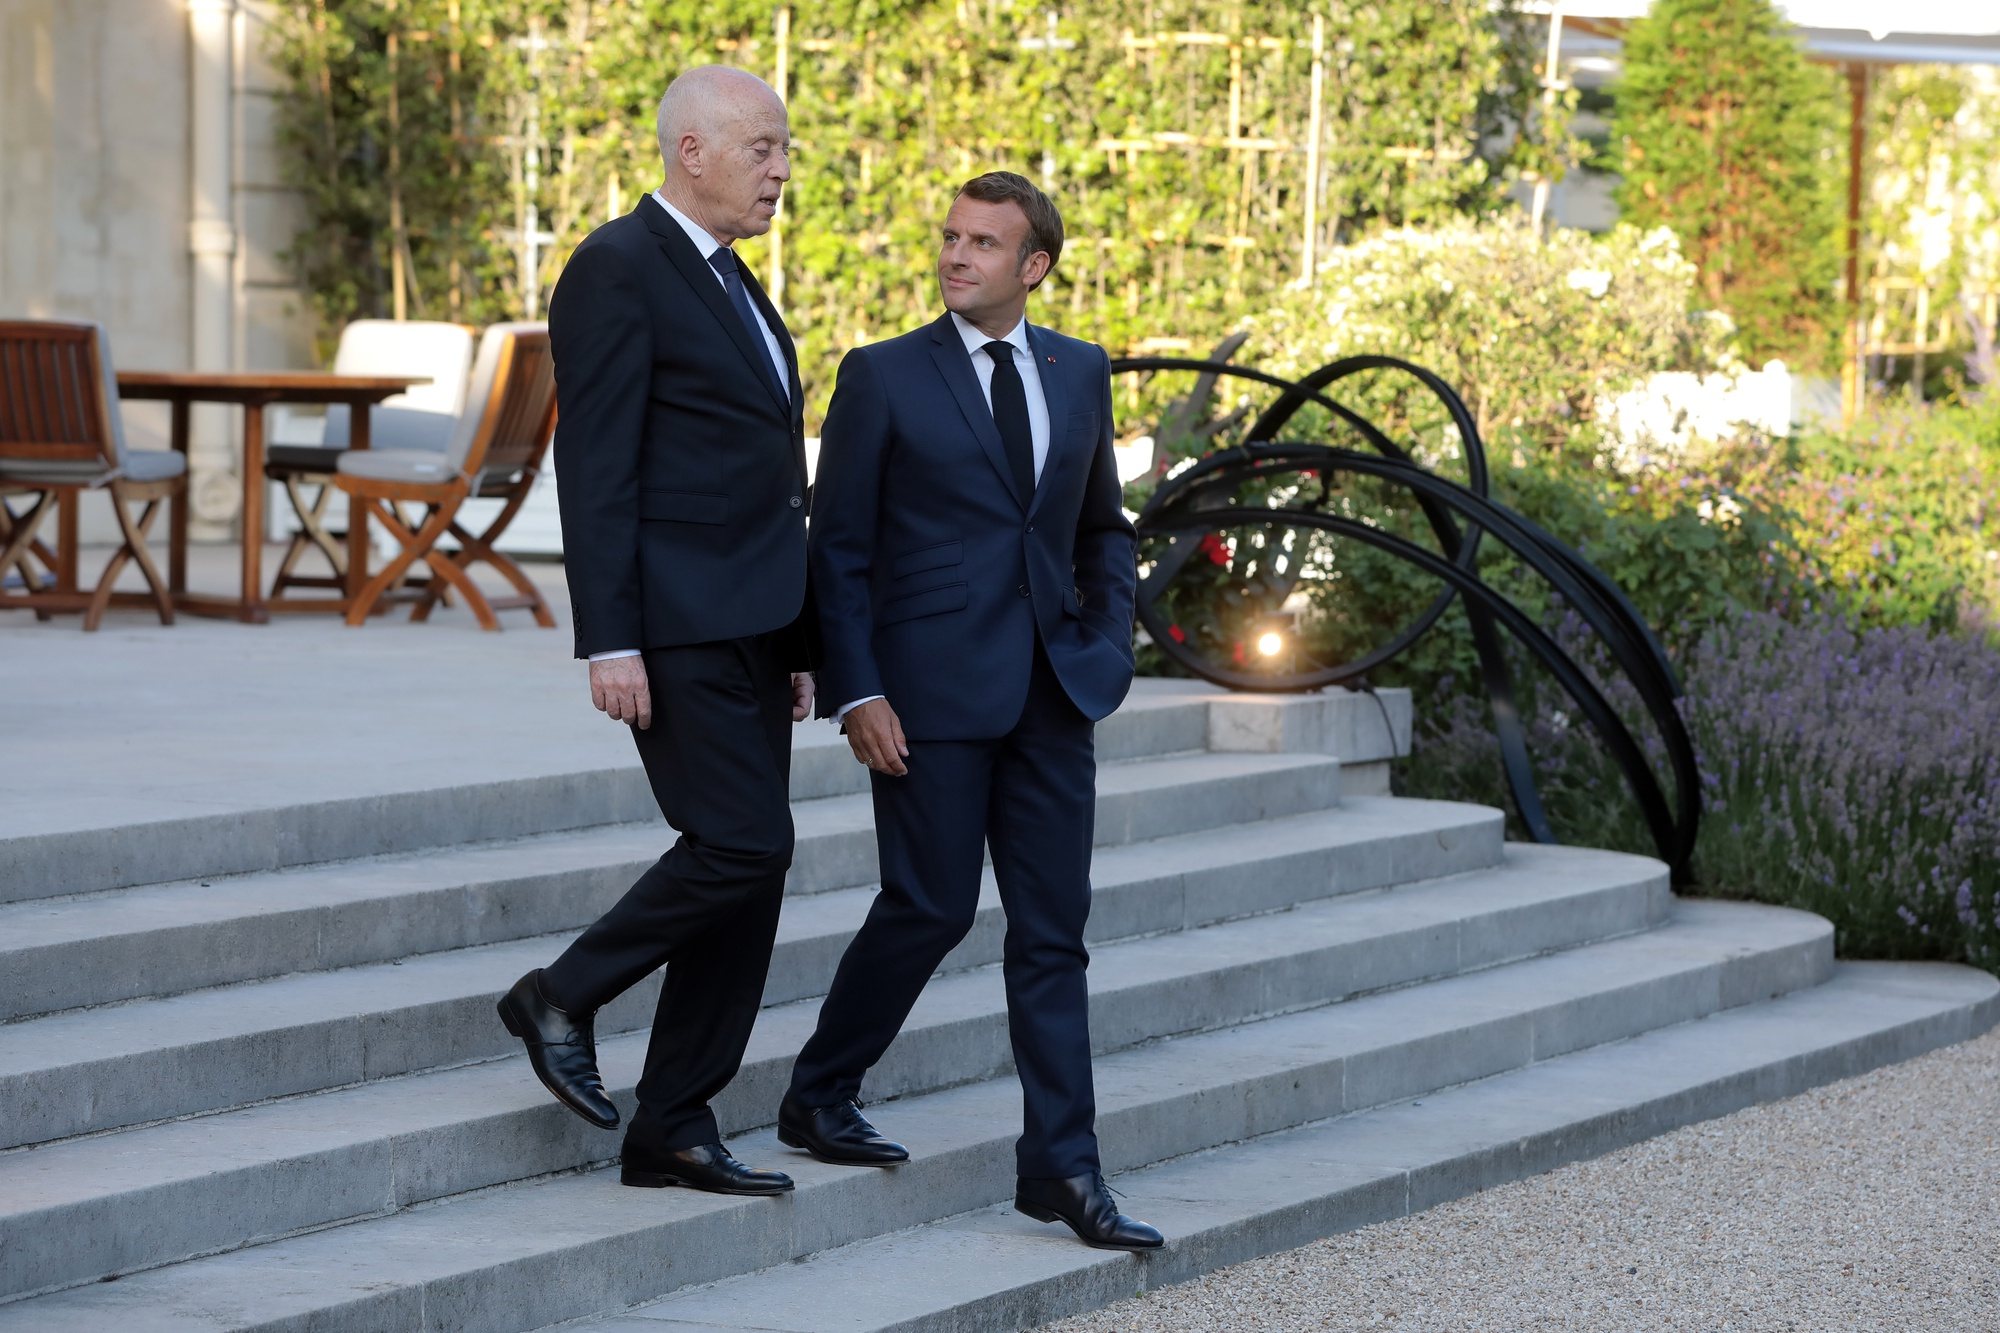 epa08502641 French president Emmanuel Macron (R) and Tunisian President Kais Saied (L) arrive for a joint press conference after their meeting at the Elysee Palace in Paris, France, 22 June 2020.  EPA/CHRISTOPHE PETIT TESSON / POOL